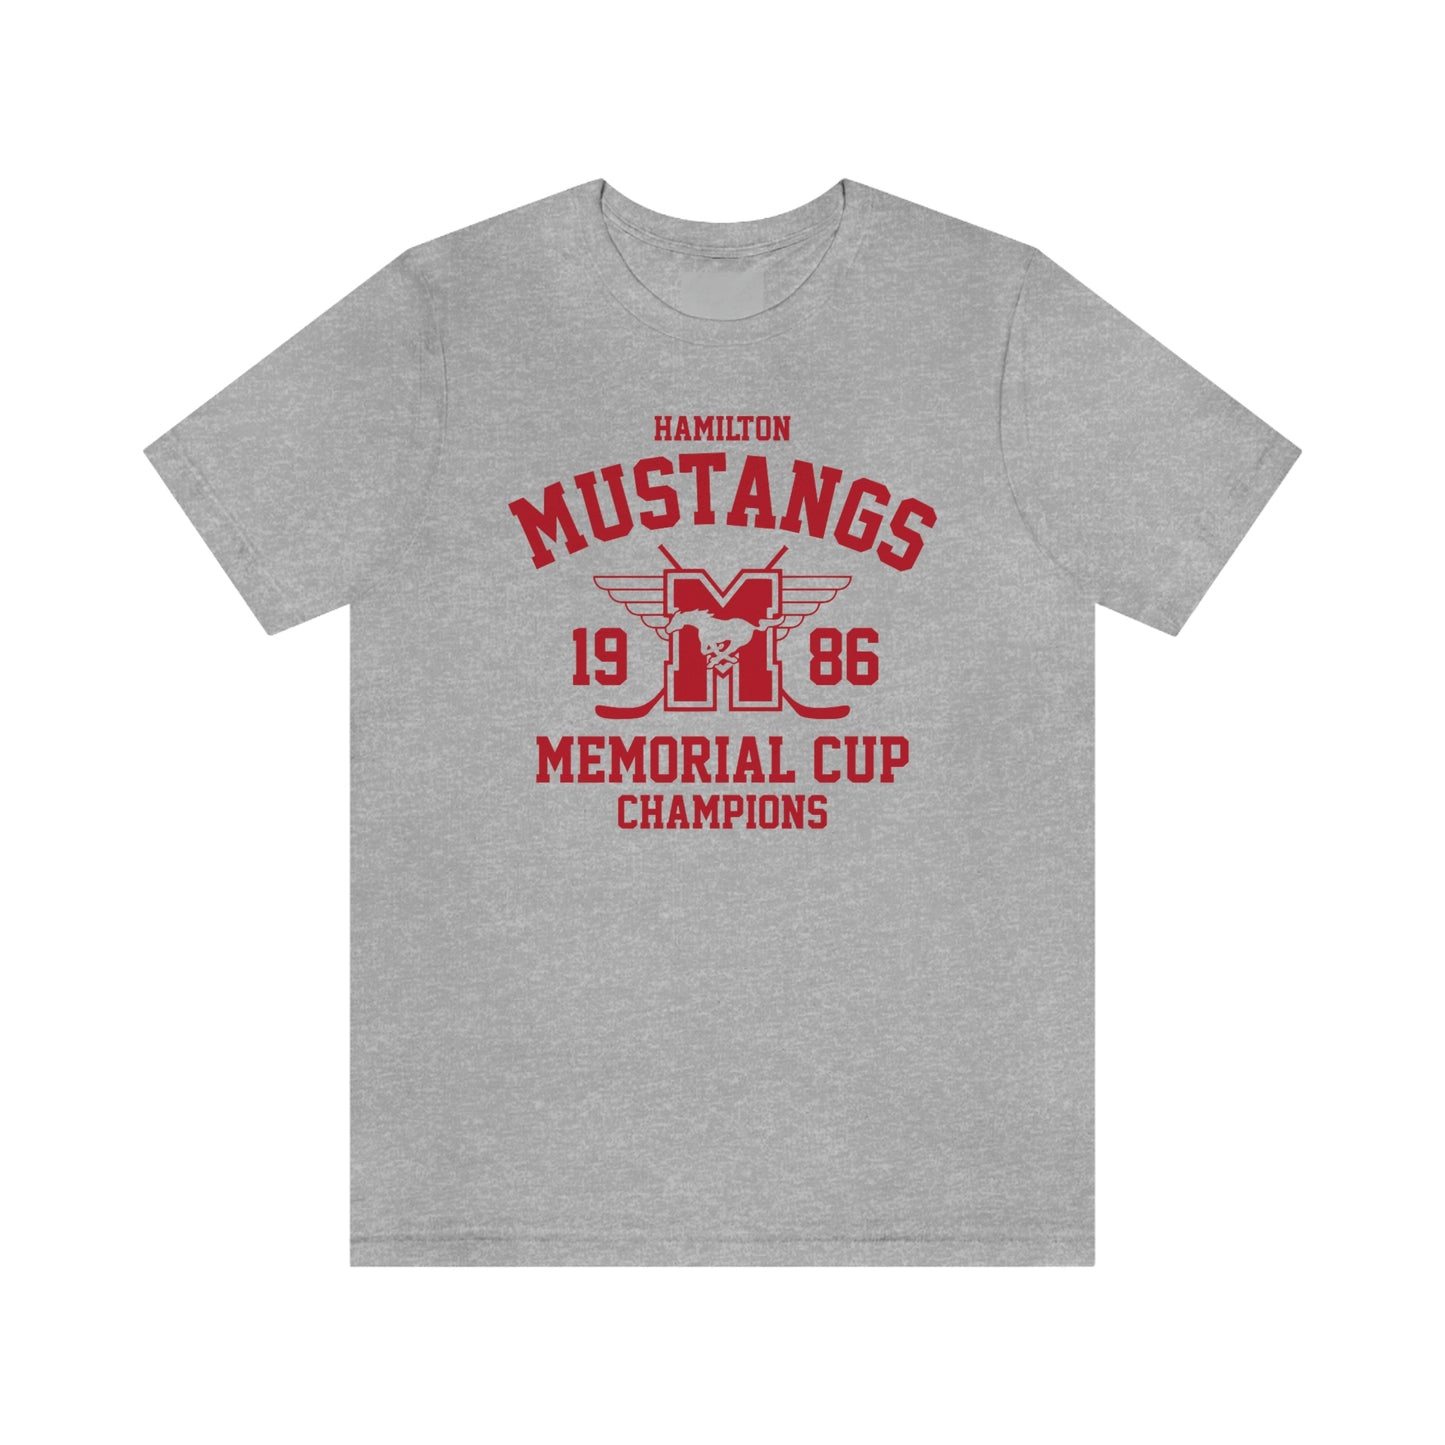 Youngblood - Hamilton Mustangs 86 Champs Shirt